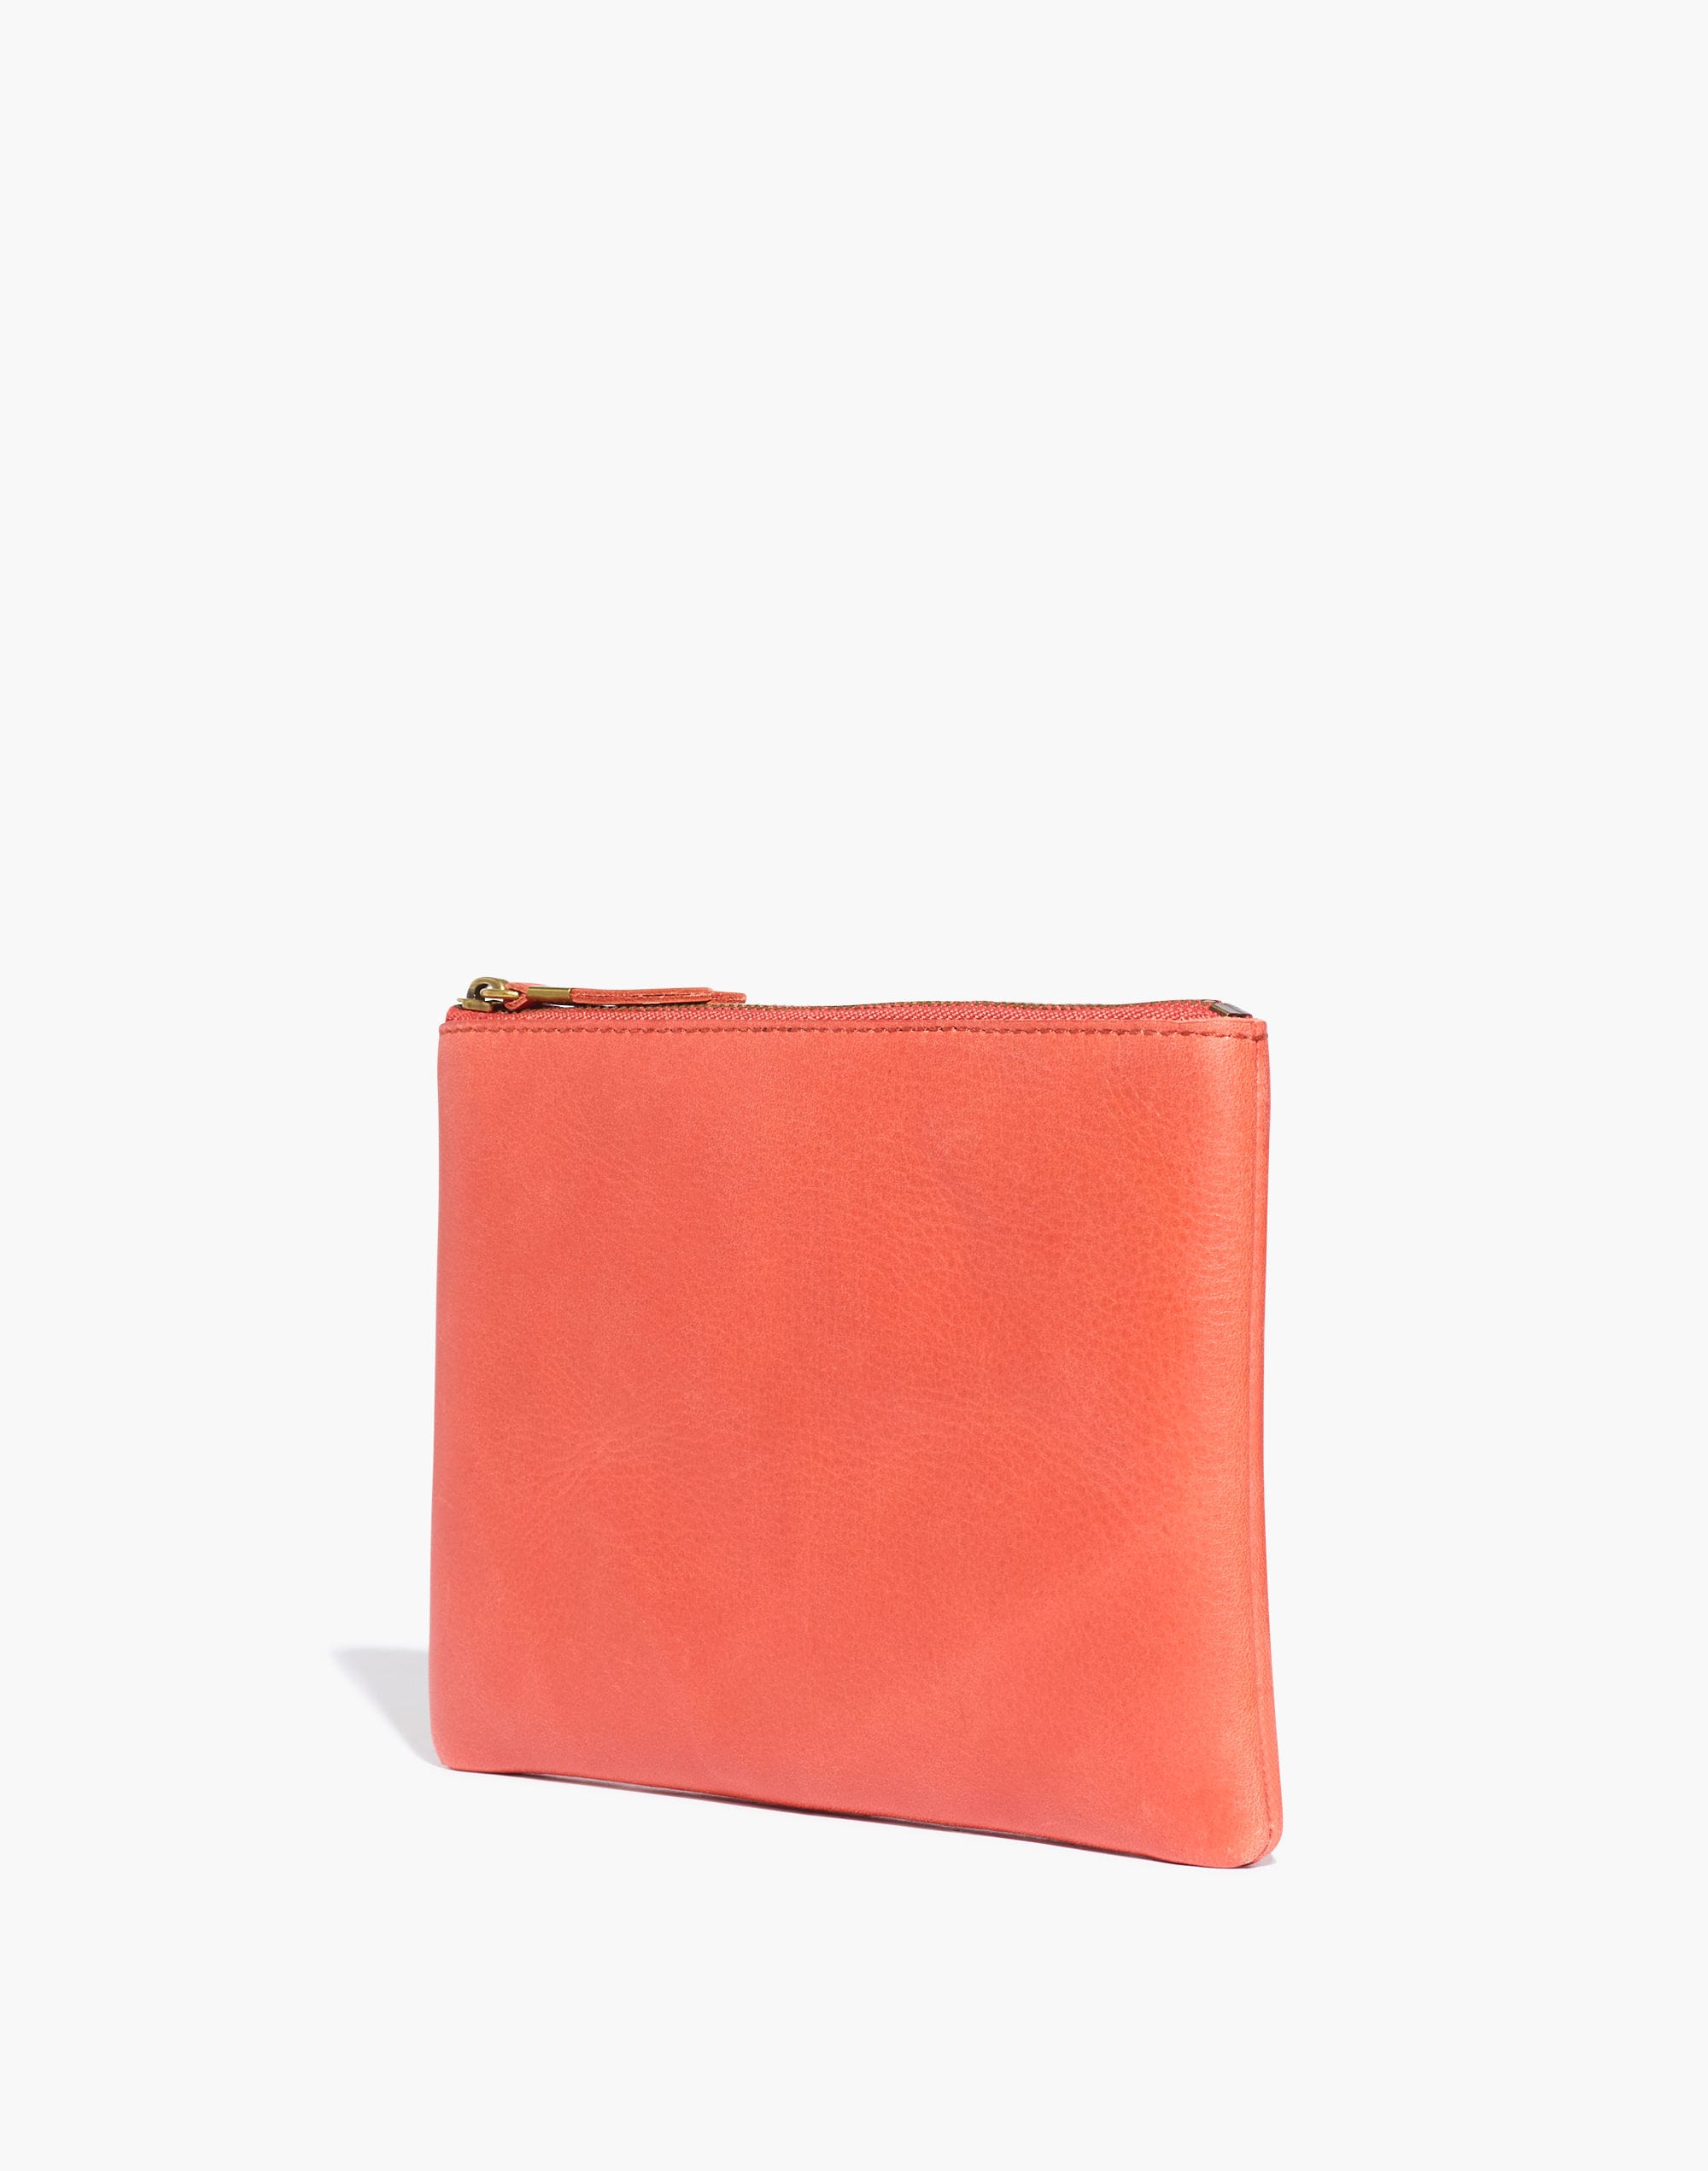 Madewell The Leather Pouch Clutch